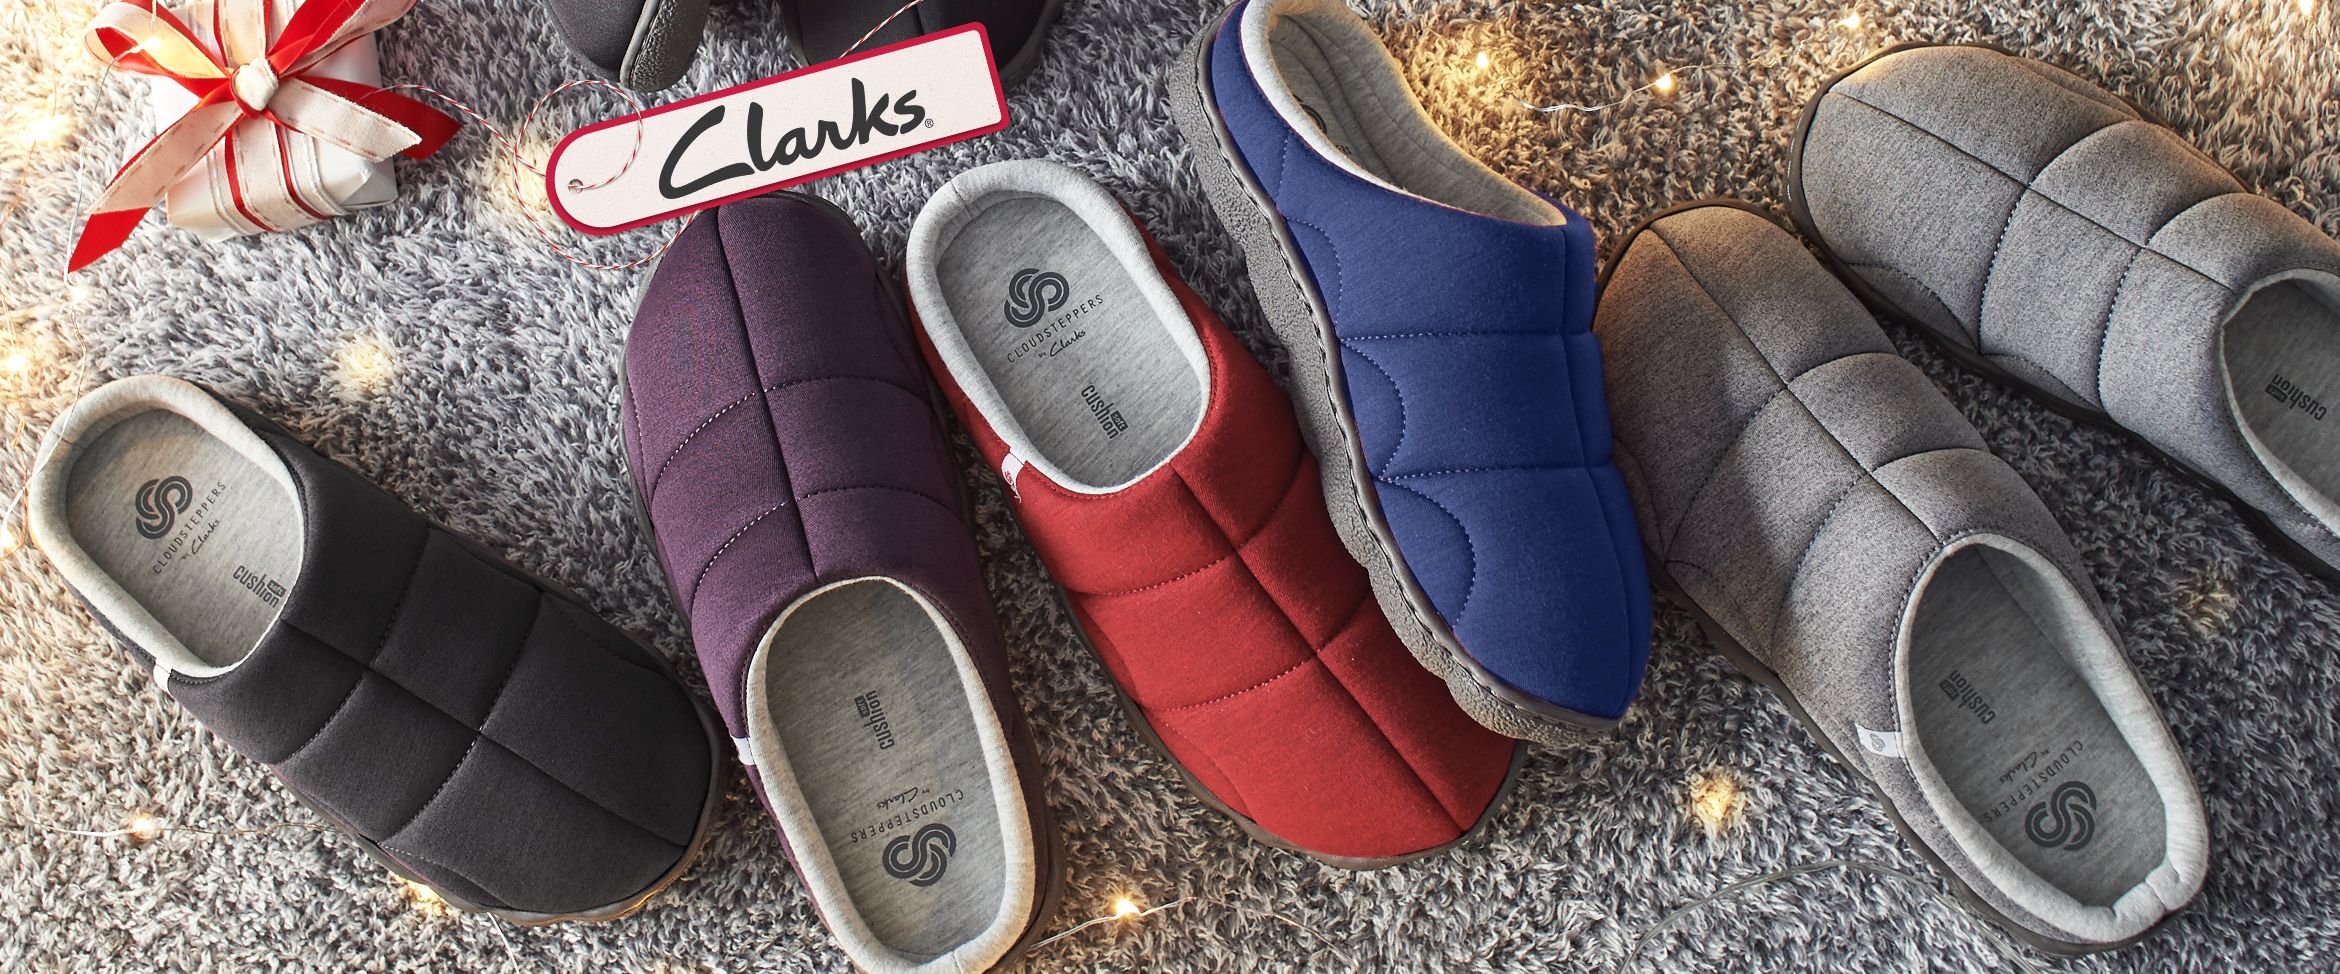 clarks cloudsteppers clogs